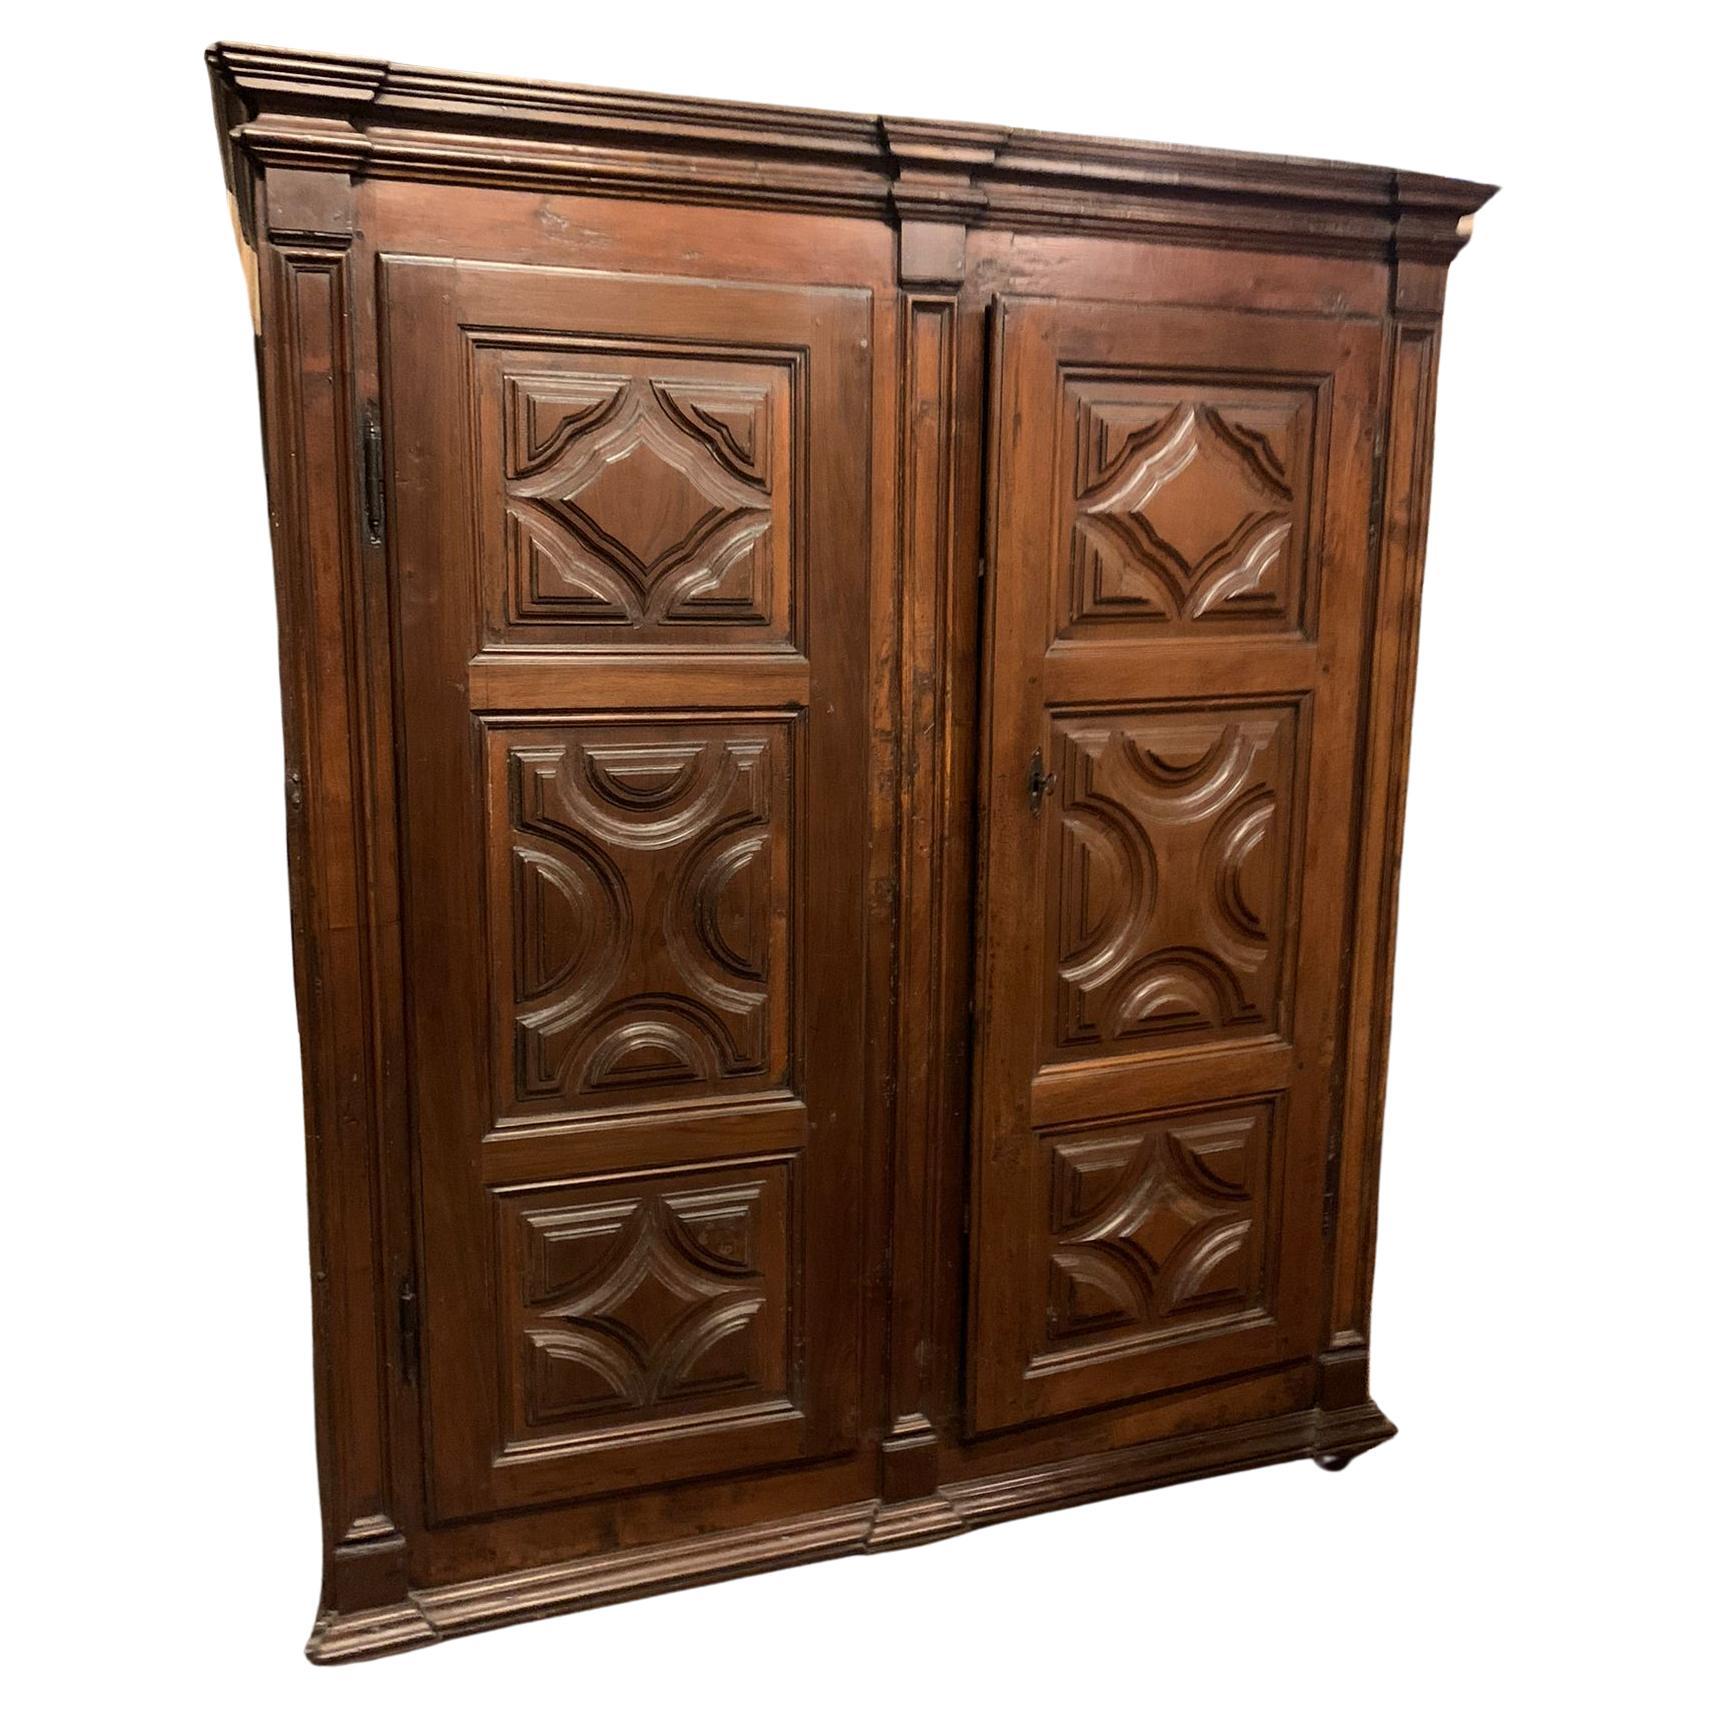 Ancient and large wardrobe, two-door wardrobe in precious hand-carved solid walnut wood, panels with baroque shapes, originating from Northern Italy, built in the 1600s, maximum dimensions cm w 170 x H 200 x D 66